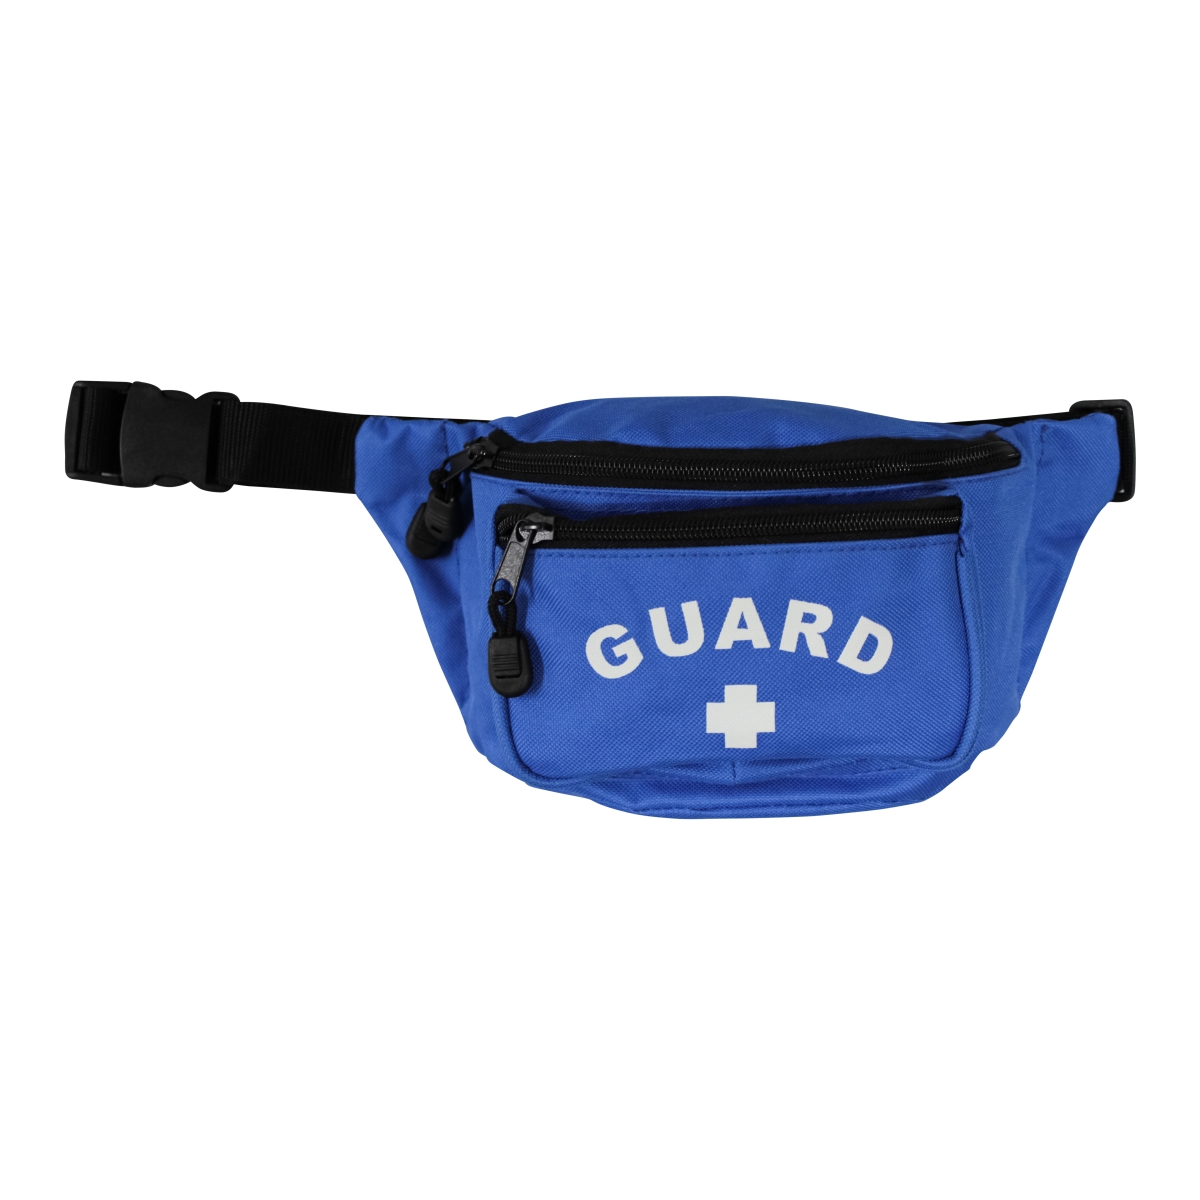 Picture of Kemp USA 10-103-ROY Hip Pack wth Guard Logo, Royal Blue